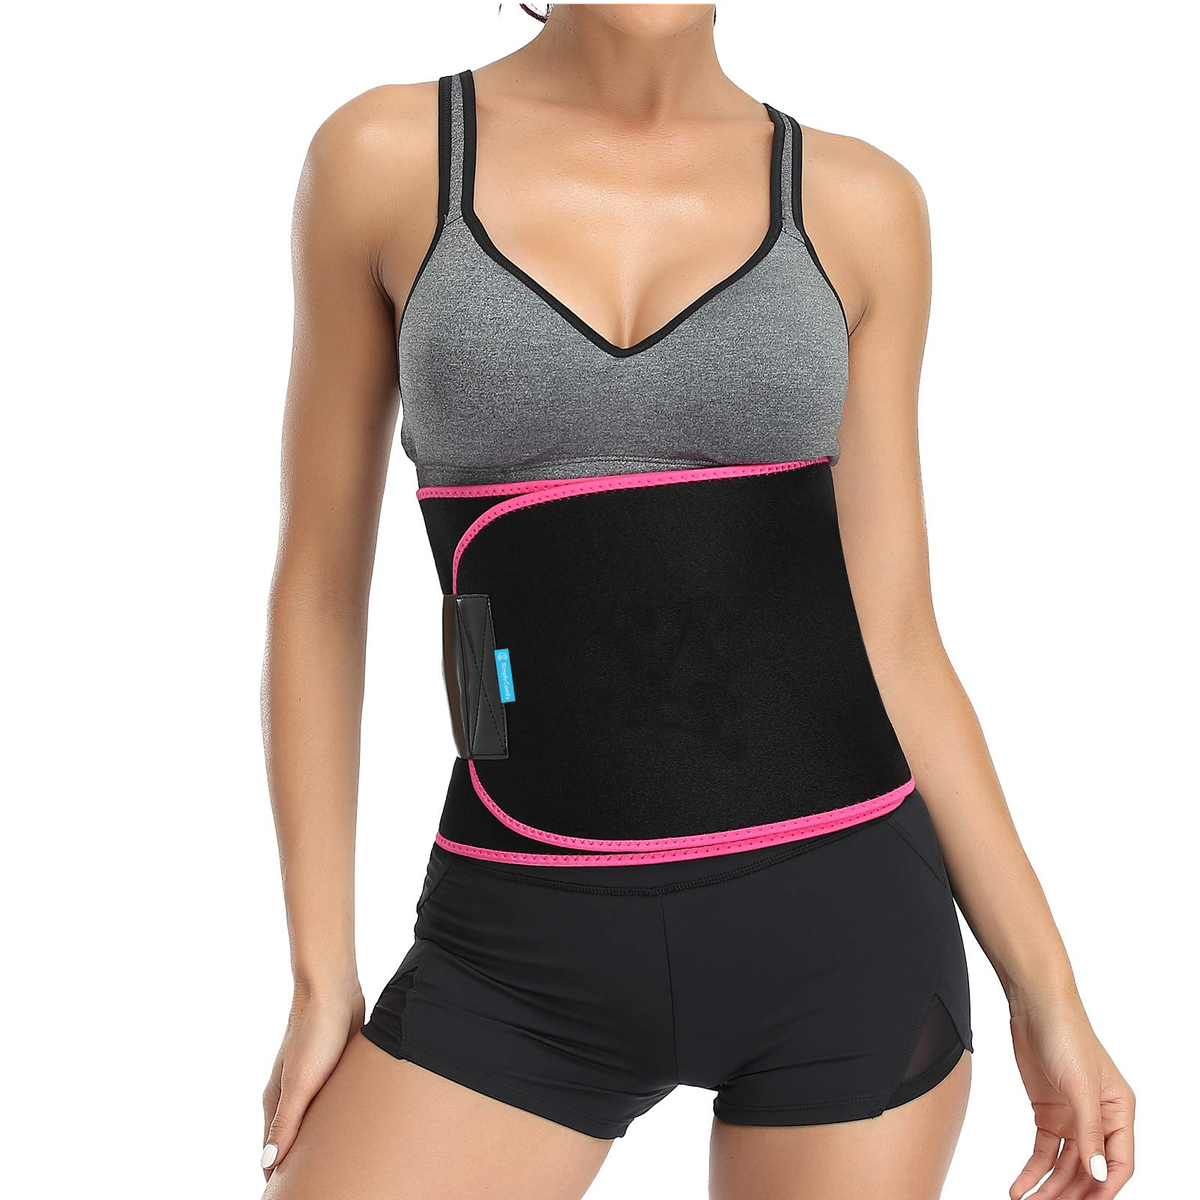 3 in 1 Butt Lifter Waist Trainer Shaping, Hips Belt Trimmer Body Shaper, Shop Today. Get it Tomorrow!